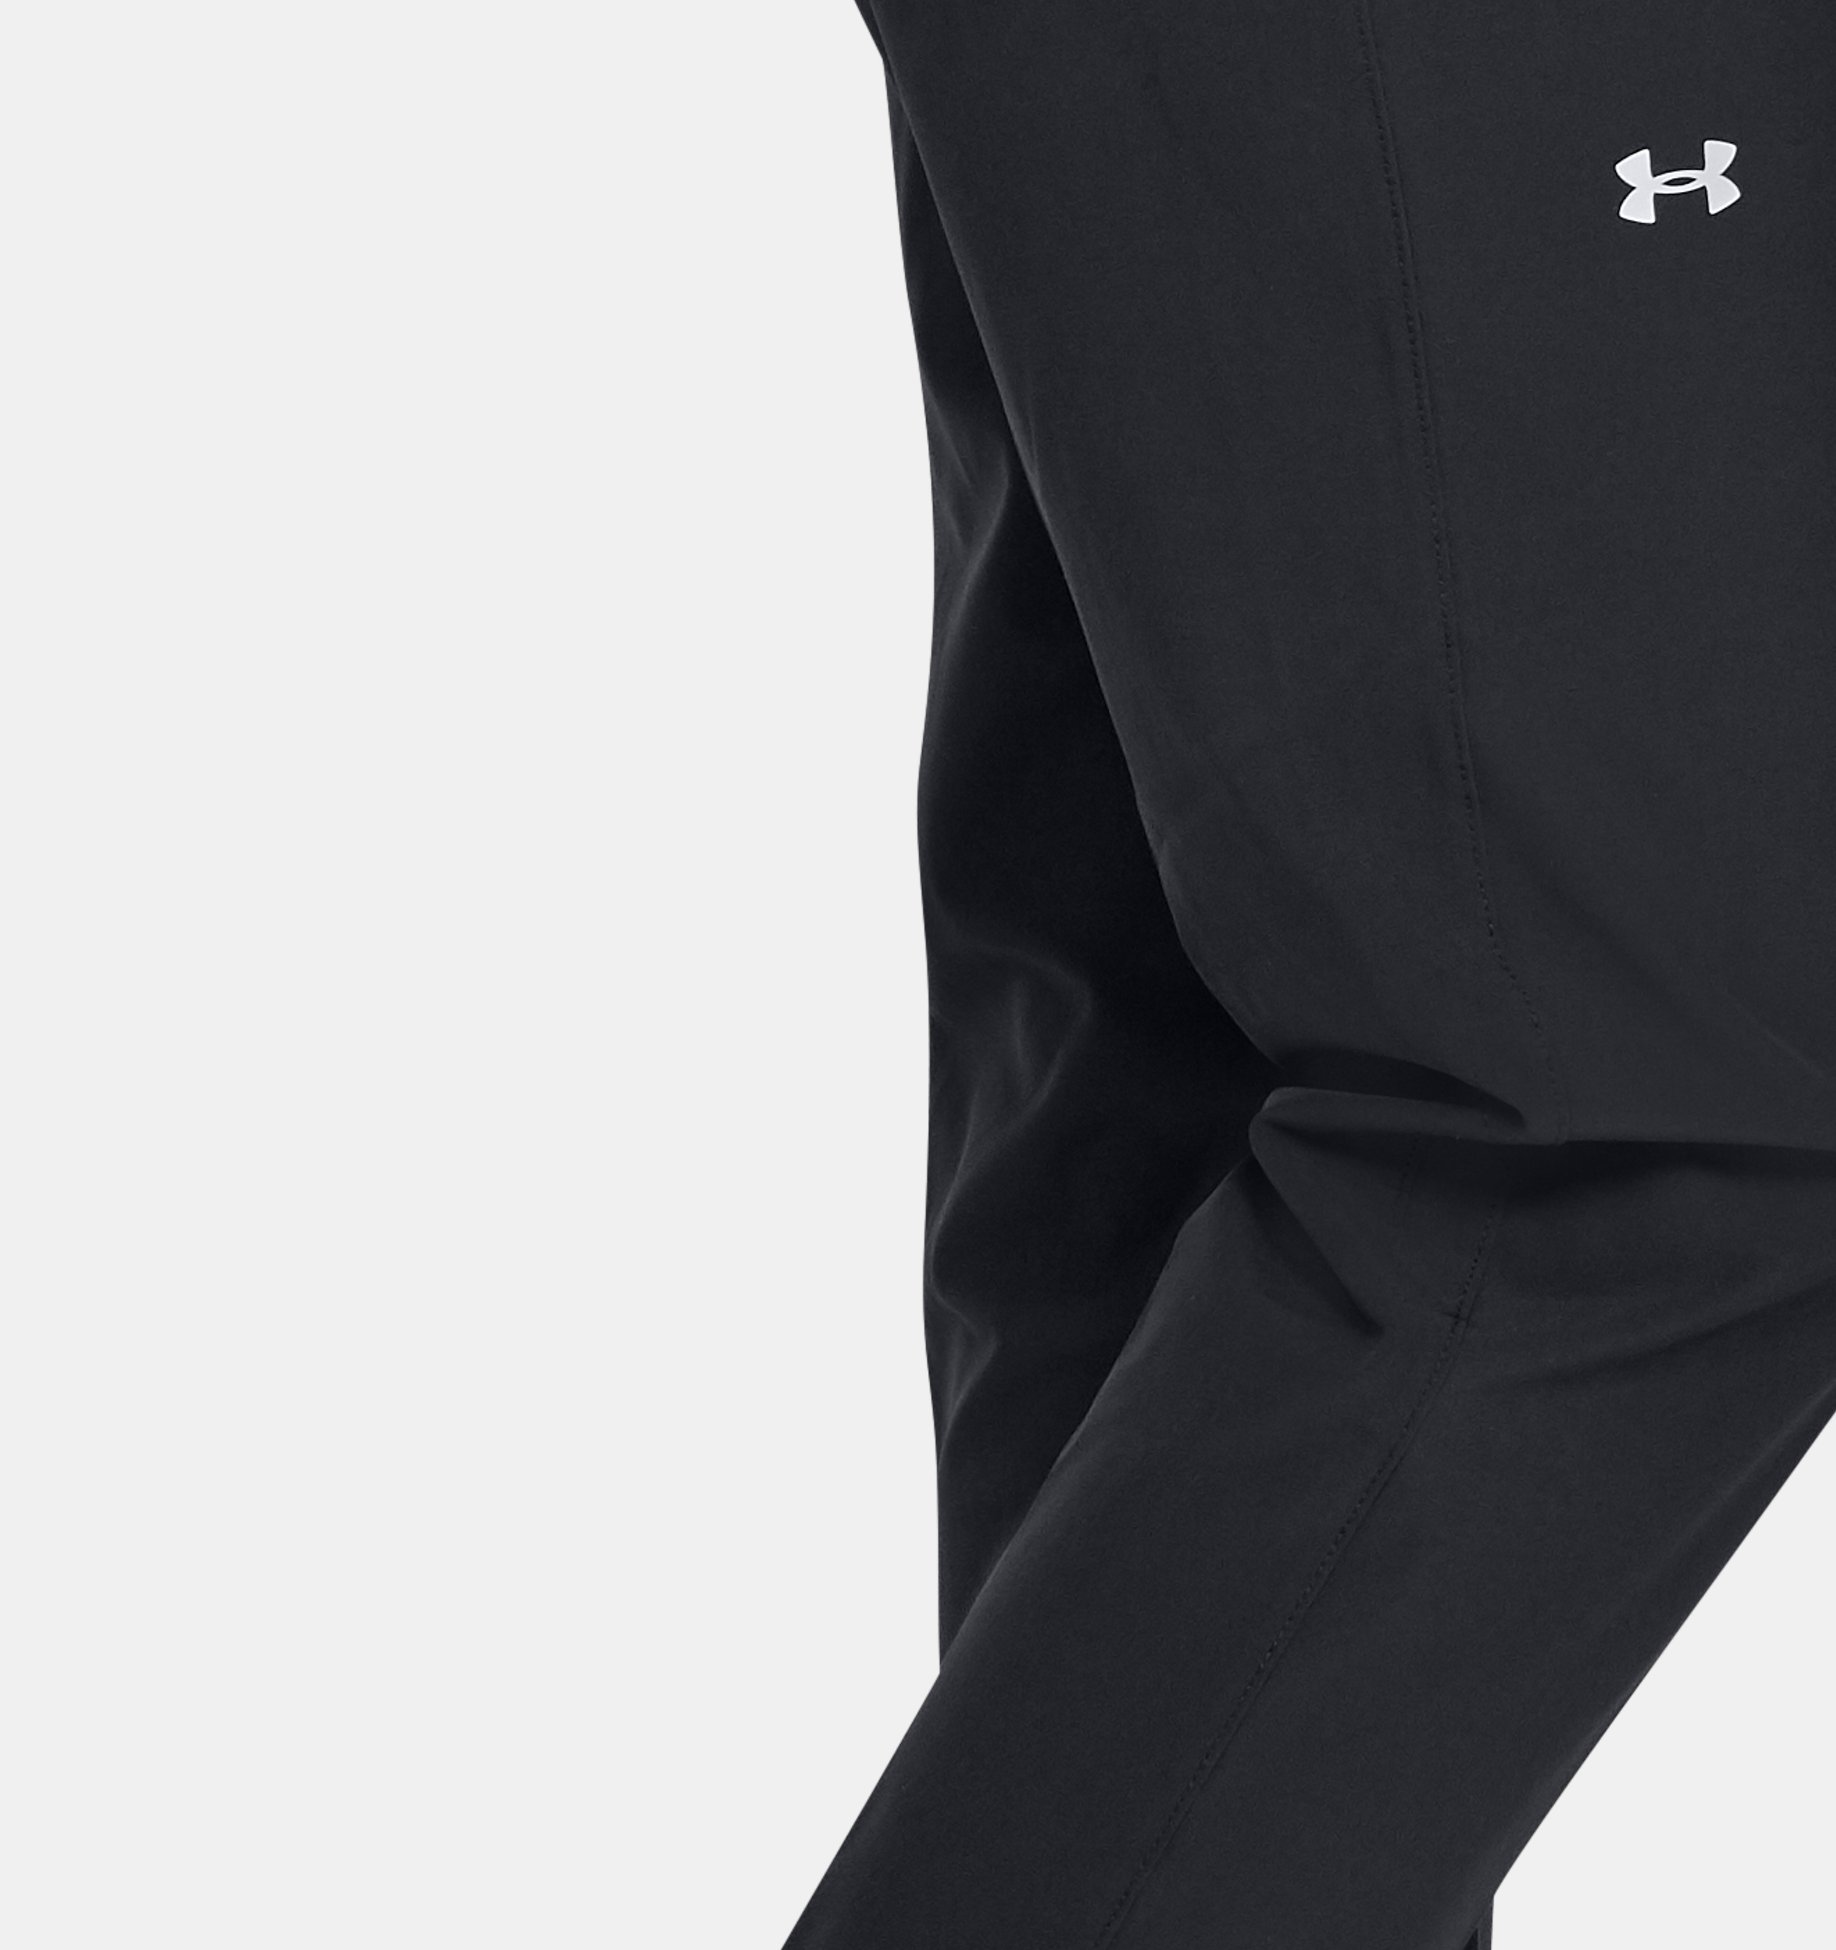 https://underarmour.scene7.com/is/image/Underarmour/V5-1348447-001_SC?rp=standard-0pad|pdpZoomDesktop&scl=0.72&fmt=jpg&qlt=85&resMode=sharp2&cache=on,on&bgc=f0f0f0&wid=1836&hei=1950&size=1500,1500